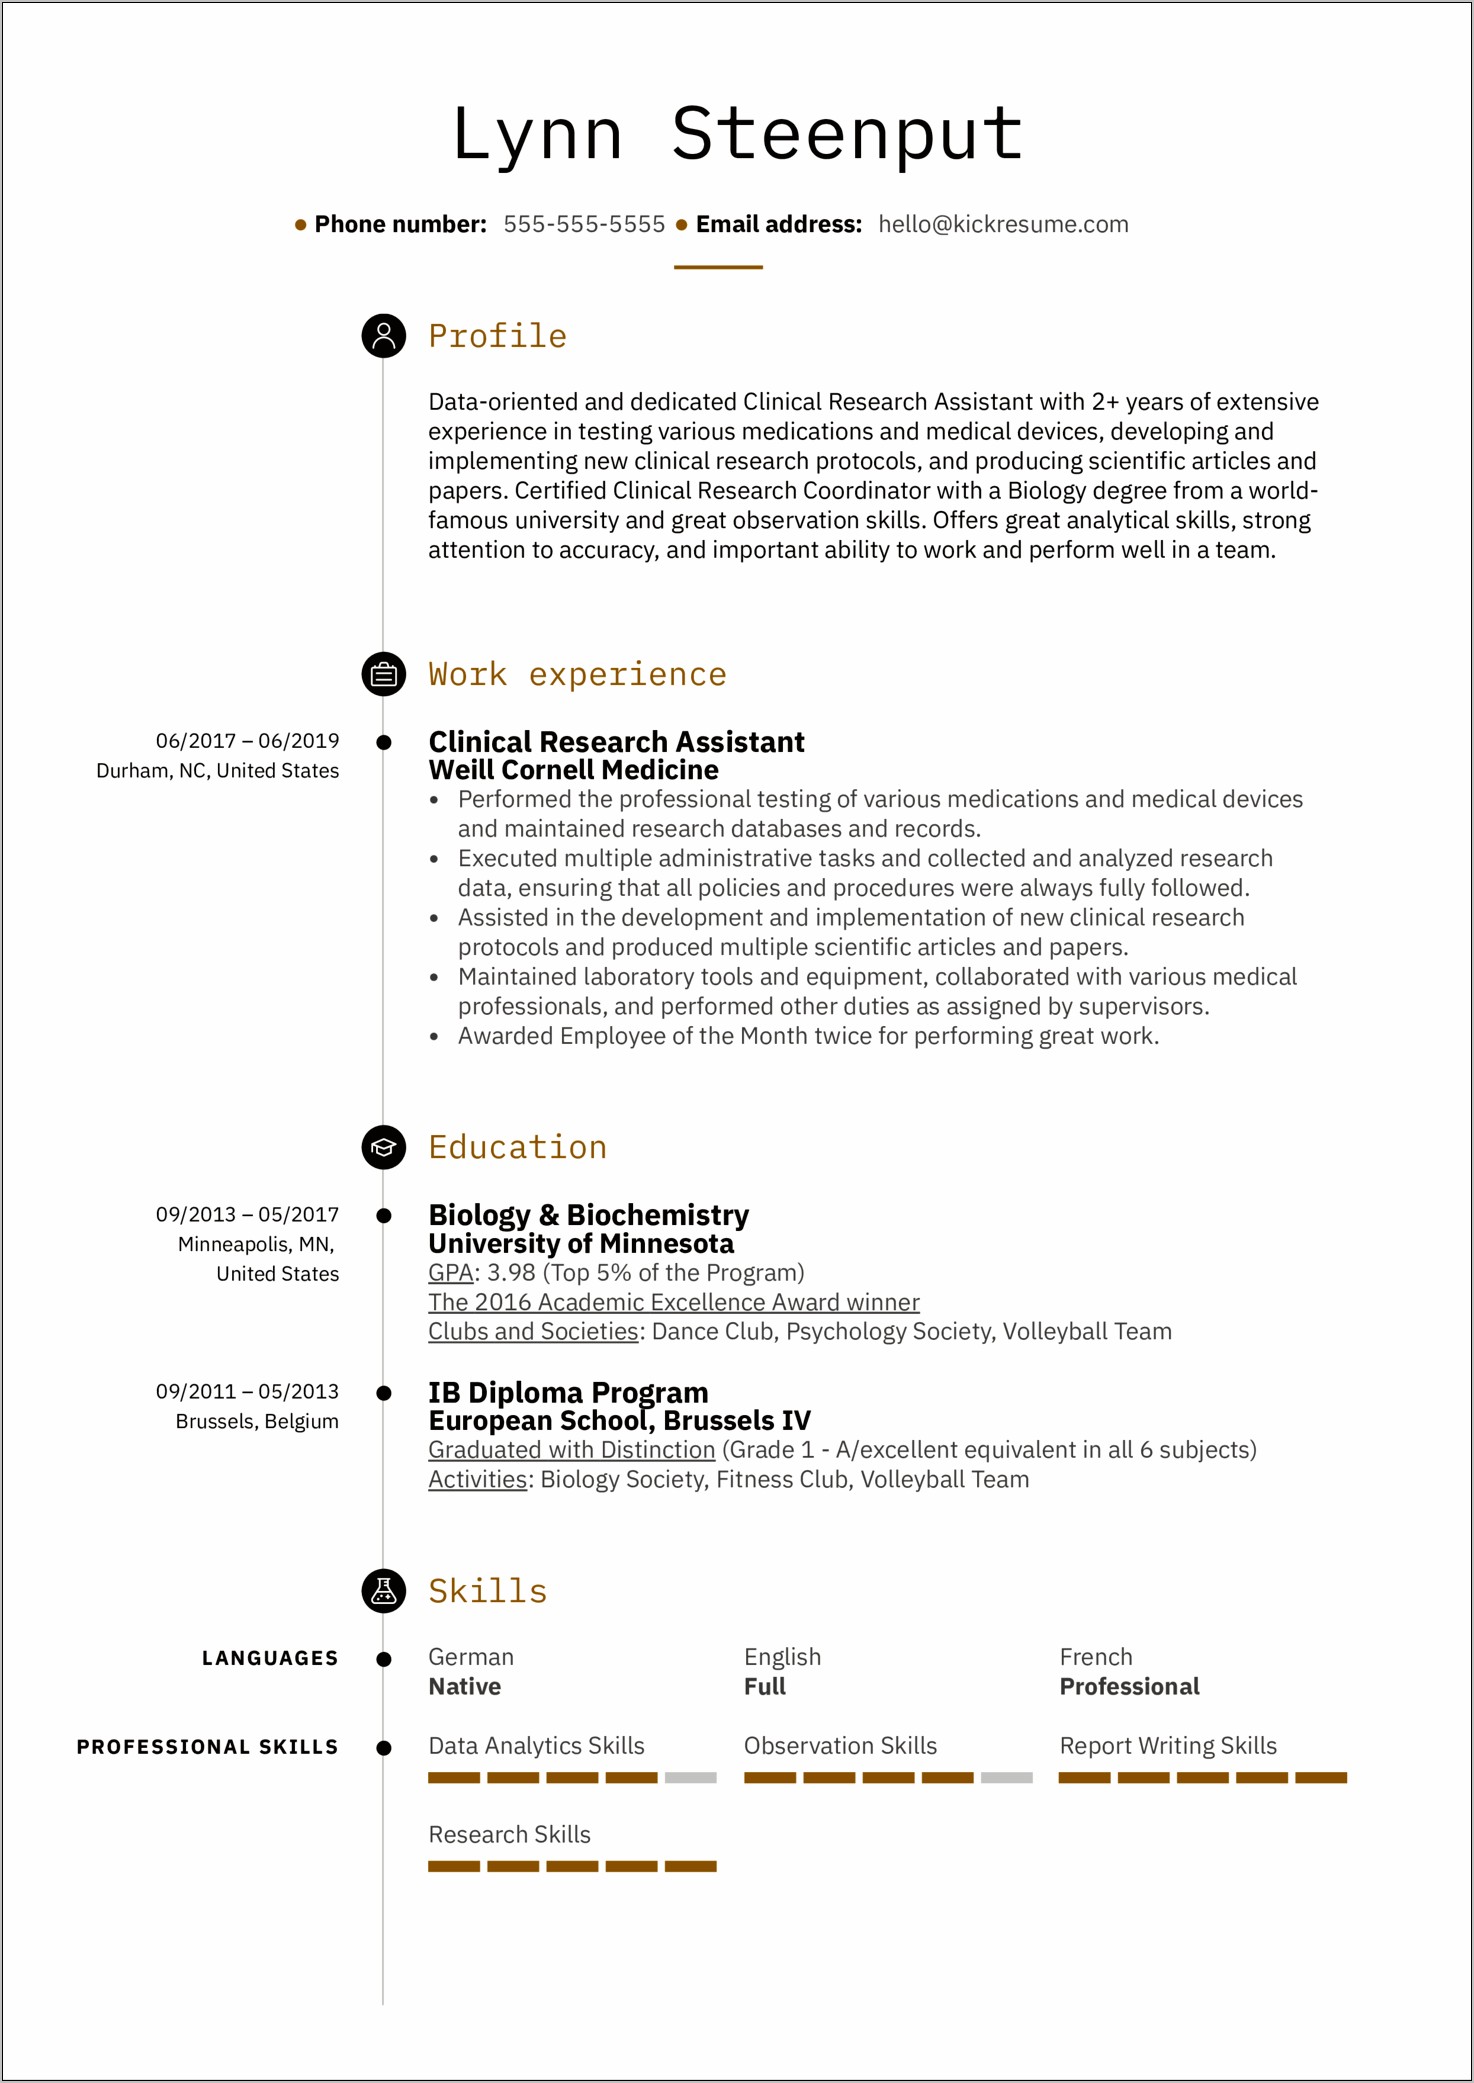 Resume Summary For A Biology Major